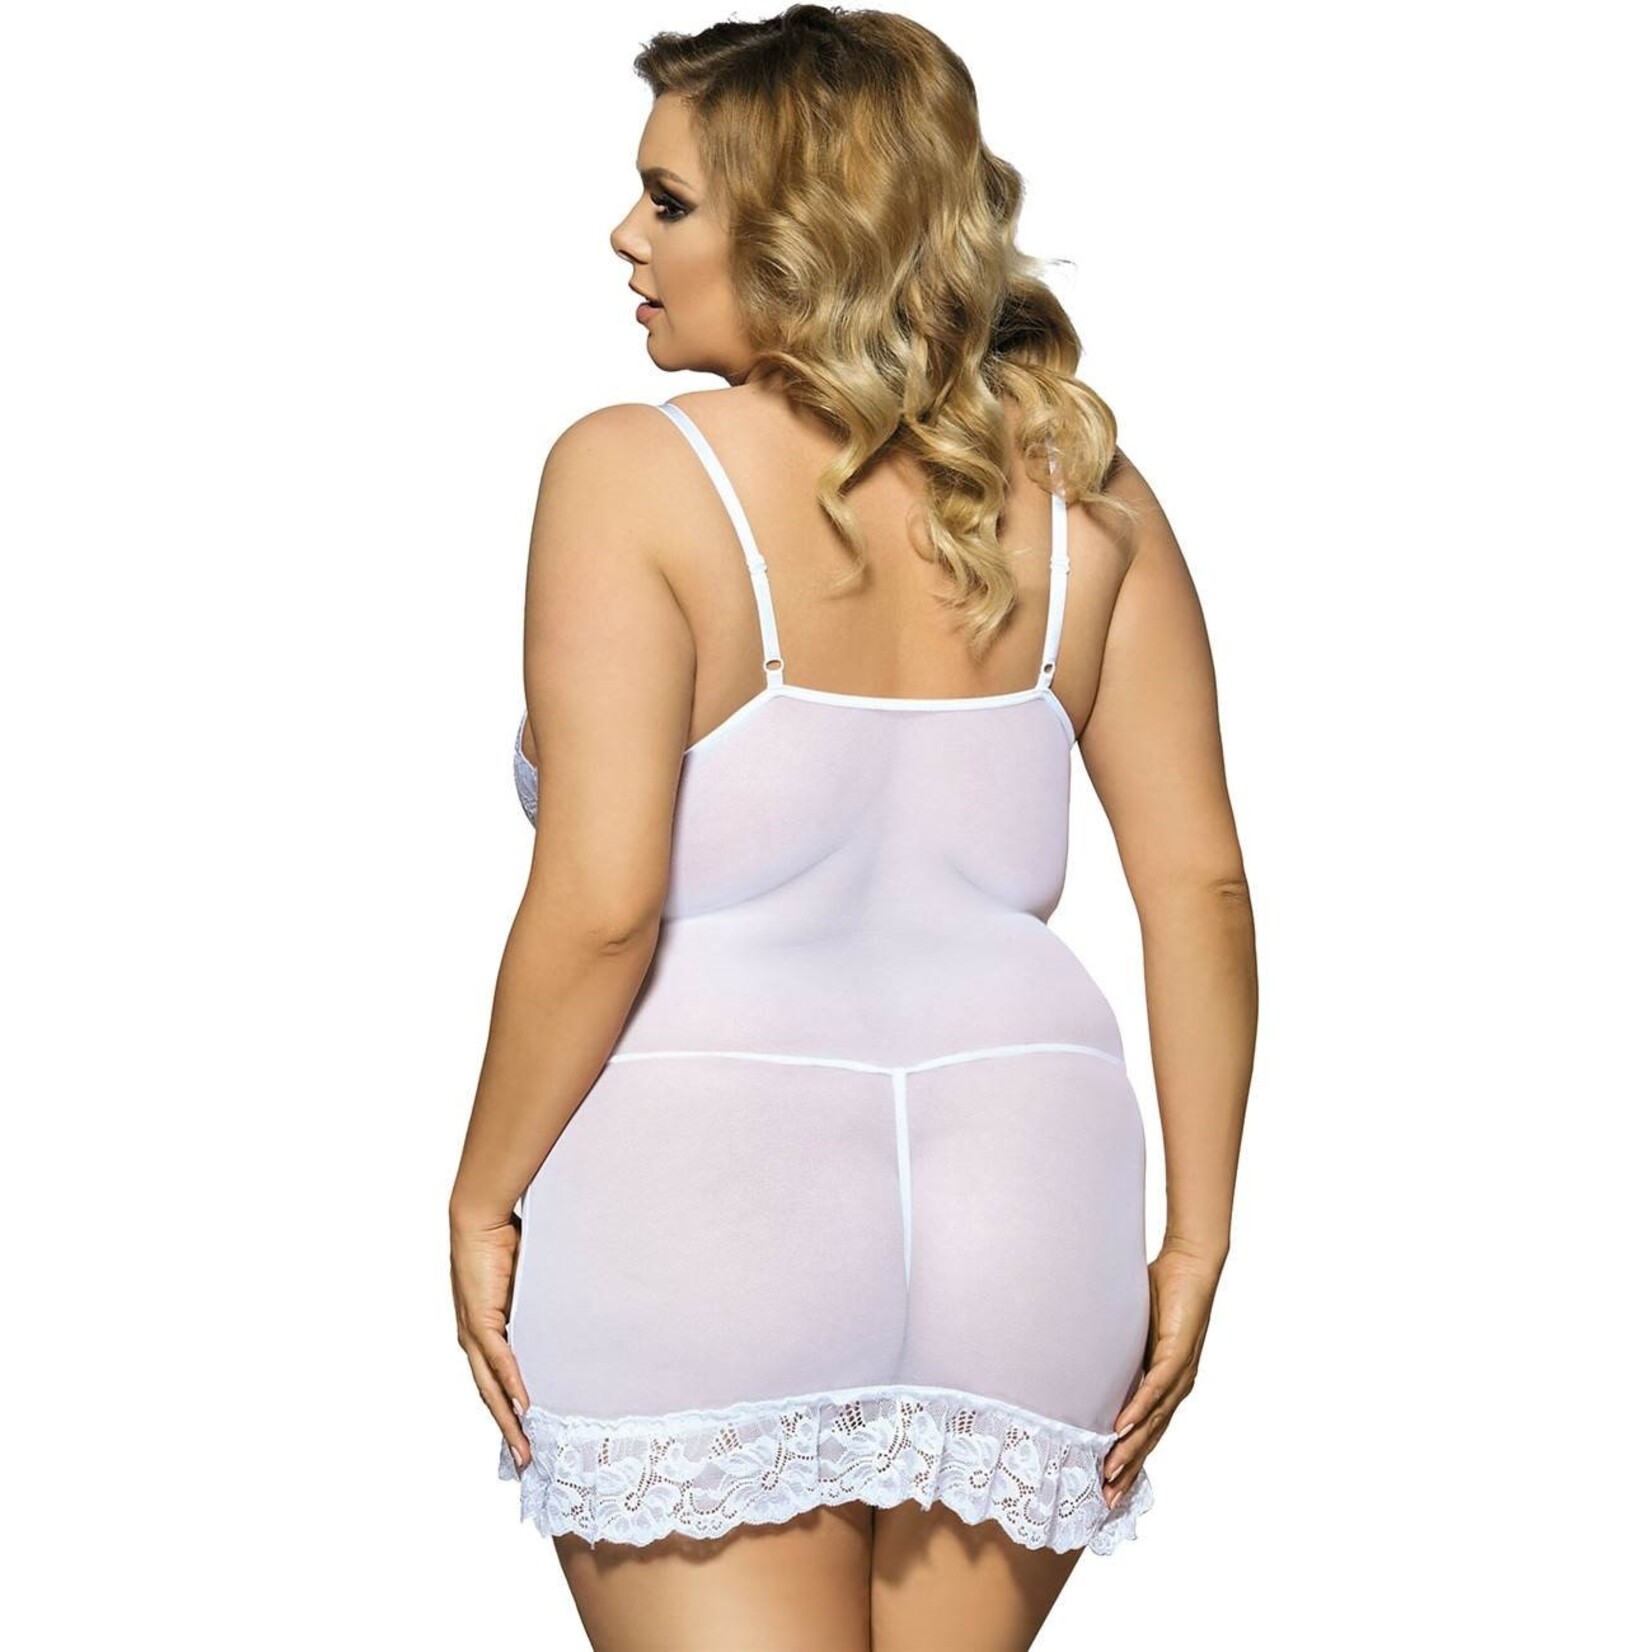 OH YEAH! -  SEXY SLIM DEEP V NECK PLUS SIZE WHITE LACE SLEEPWEAR WITH THONG XL-2XL